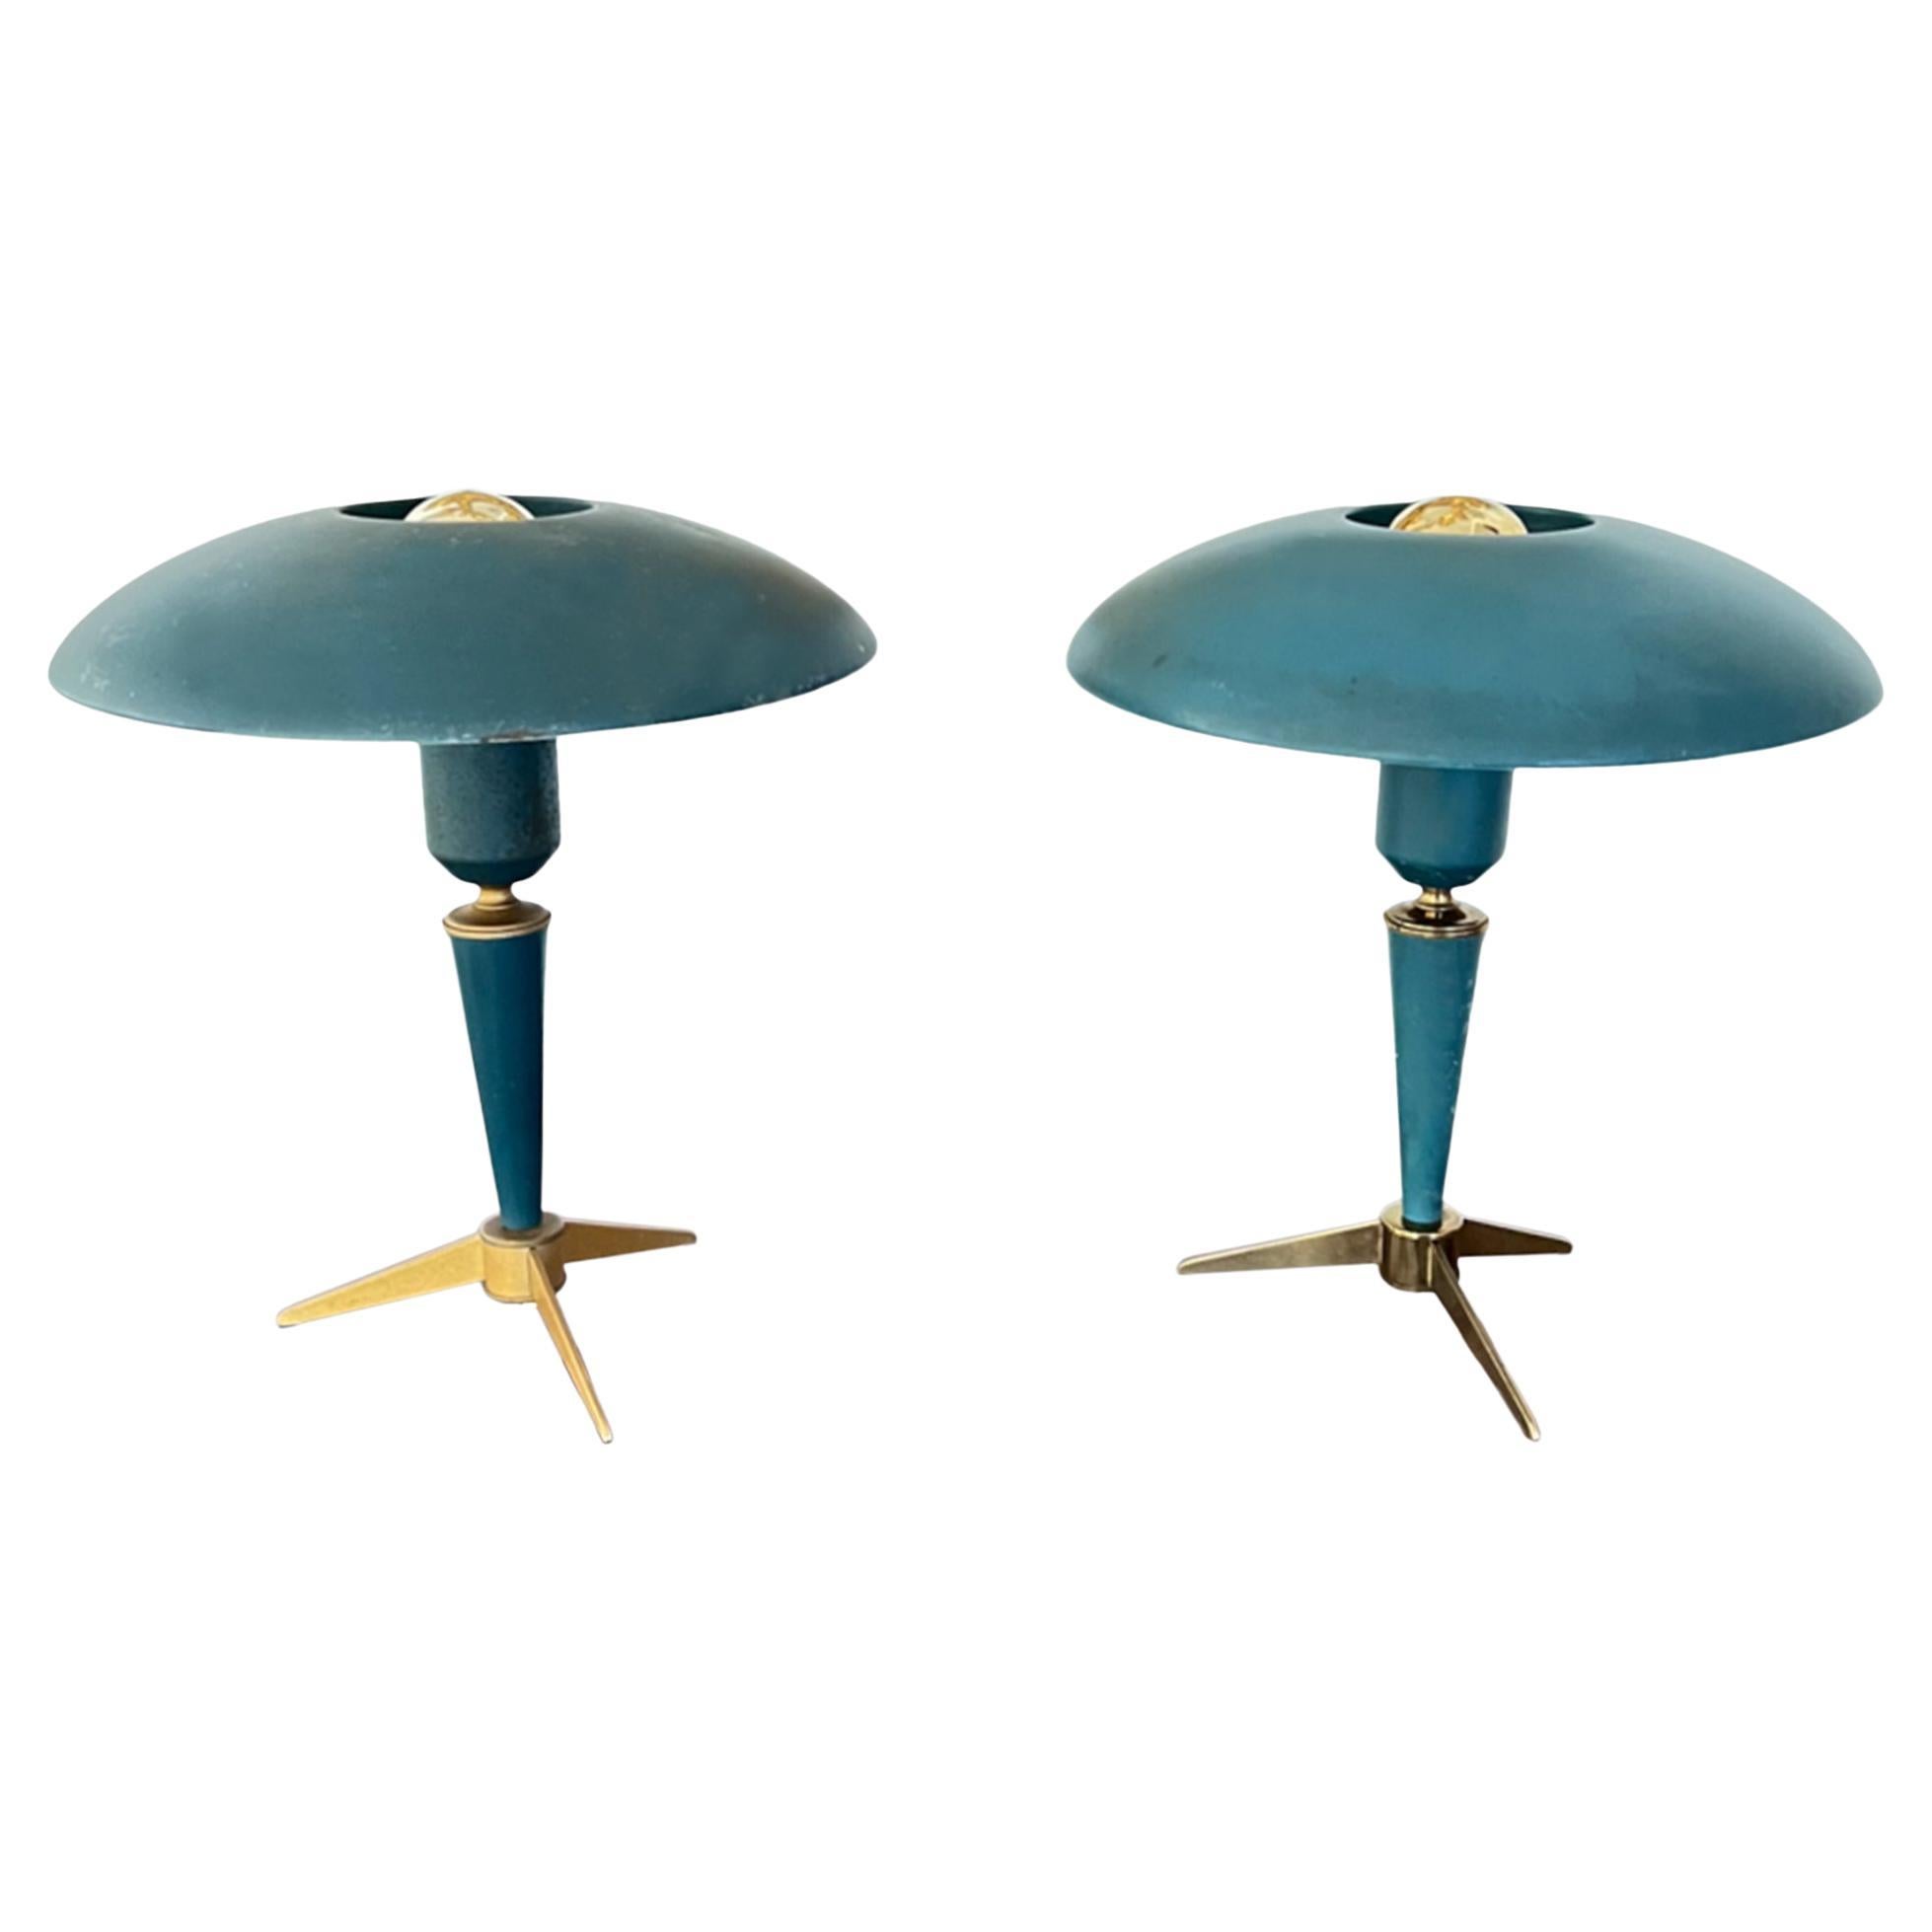 Pair of Blue Midcentury Louis C. Kalff Table Lamps for Philips